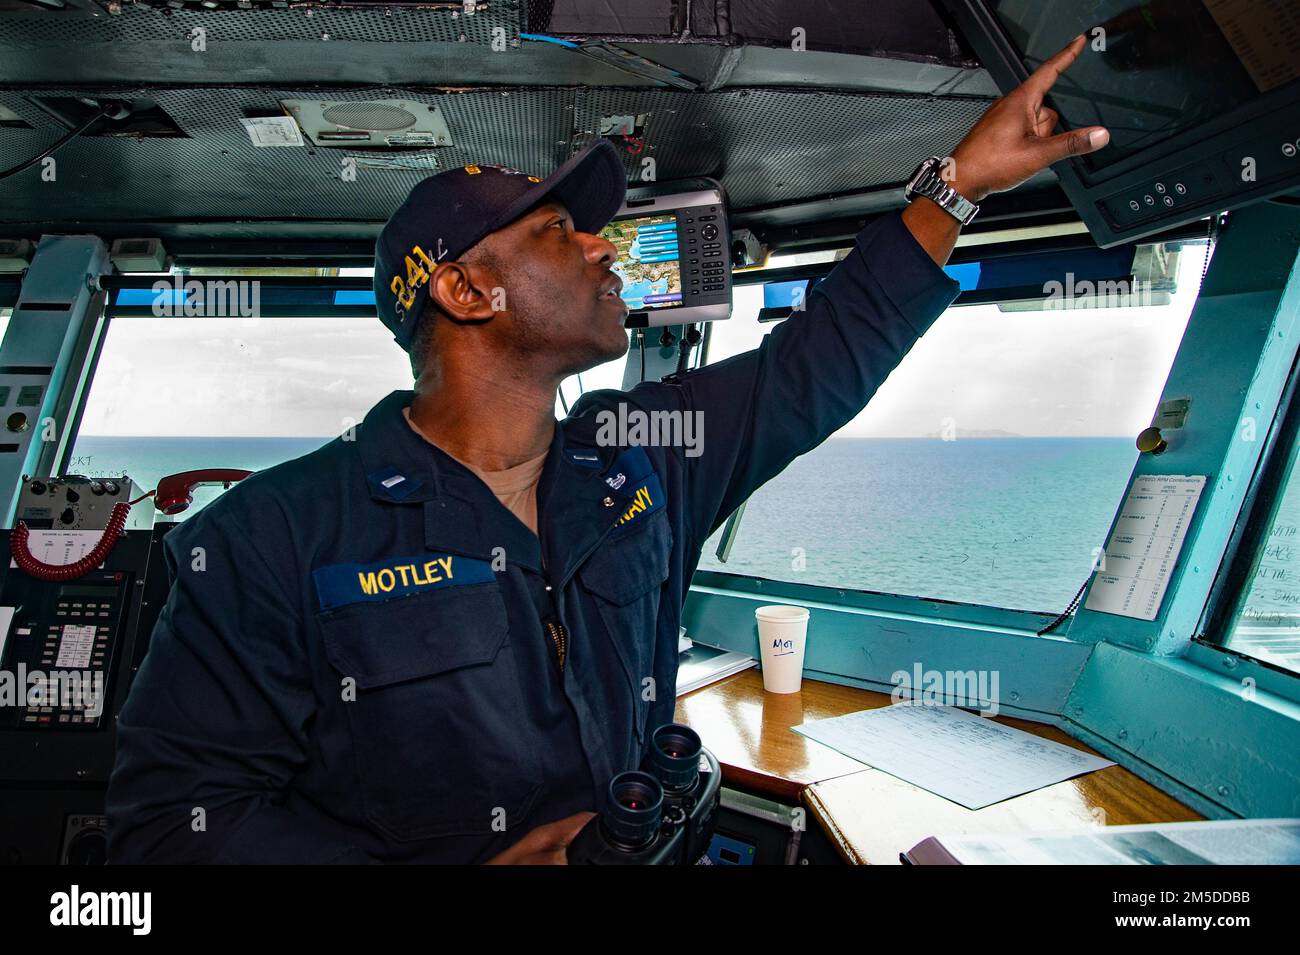 220304-N-TO573-1099 NORTH AEGEAN SEA (Mar. 4, 2022) Lt. j.g. Dennis Motley, from Flint, Michigan, confirms coordinates on the bridge of the Nimitz-class aircraft carrier USS Harry S. Truman (CVN 75), Mar. 4, 2022. The Harry S. Truman Carrier Strike Group is on a scheduled deployment in the U.S. Sixth Fleet area of operations in support of U.S., allied and partner interests in Europe and Africa. Stock Photo